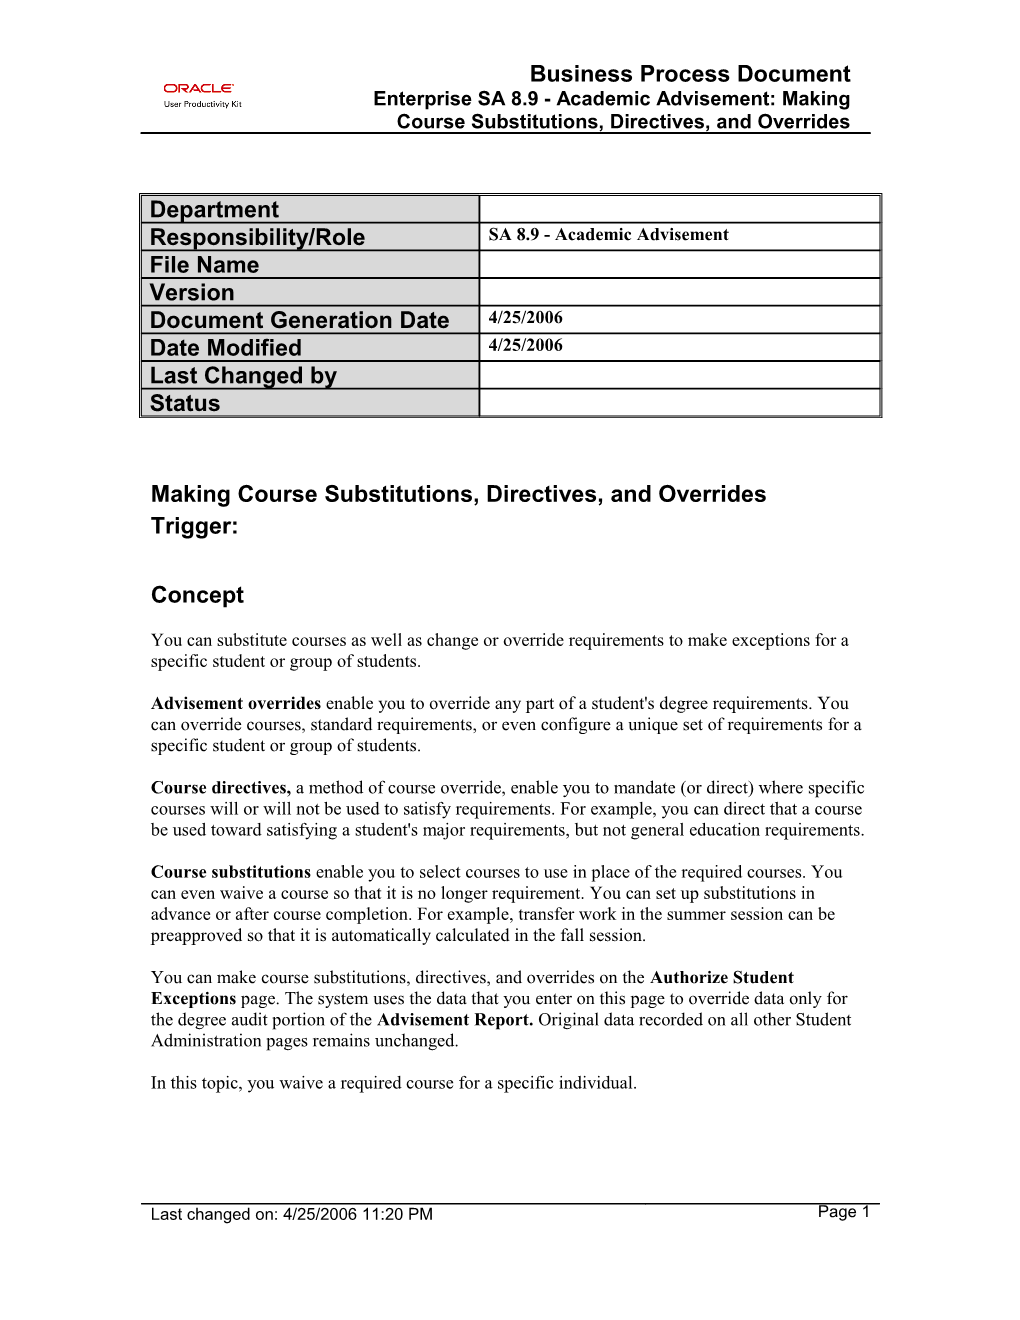 Making Course Substitutions, Directives, and Overrides